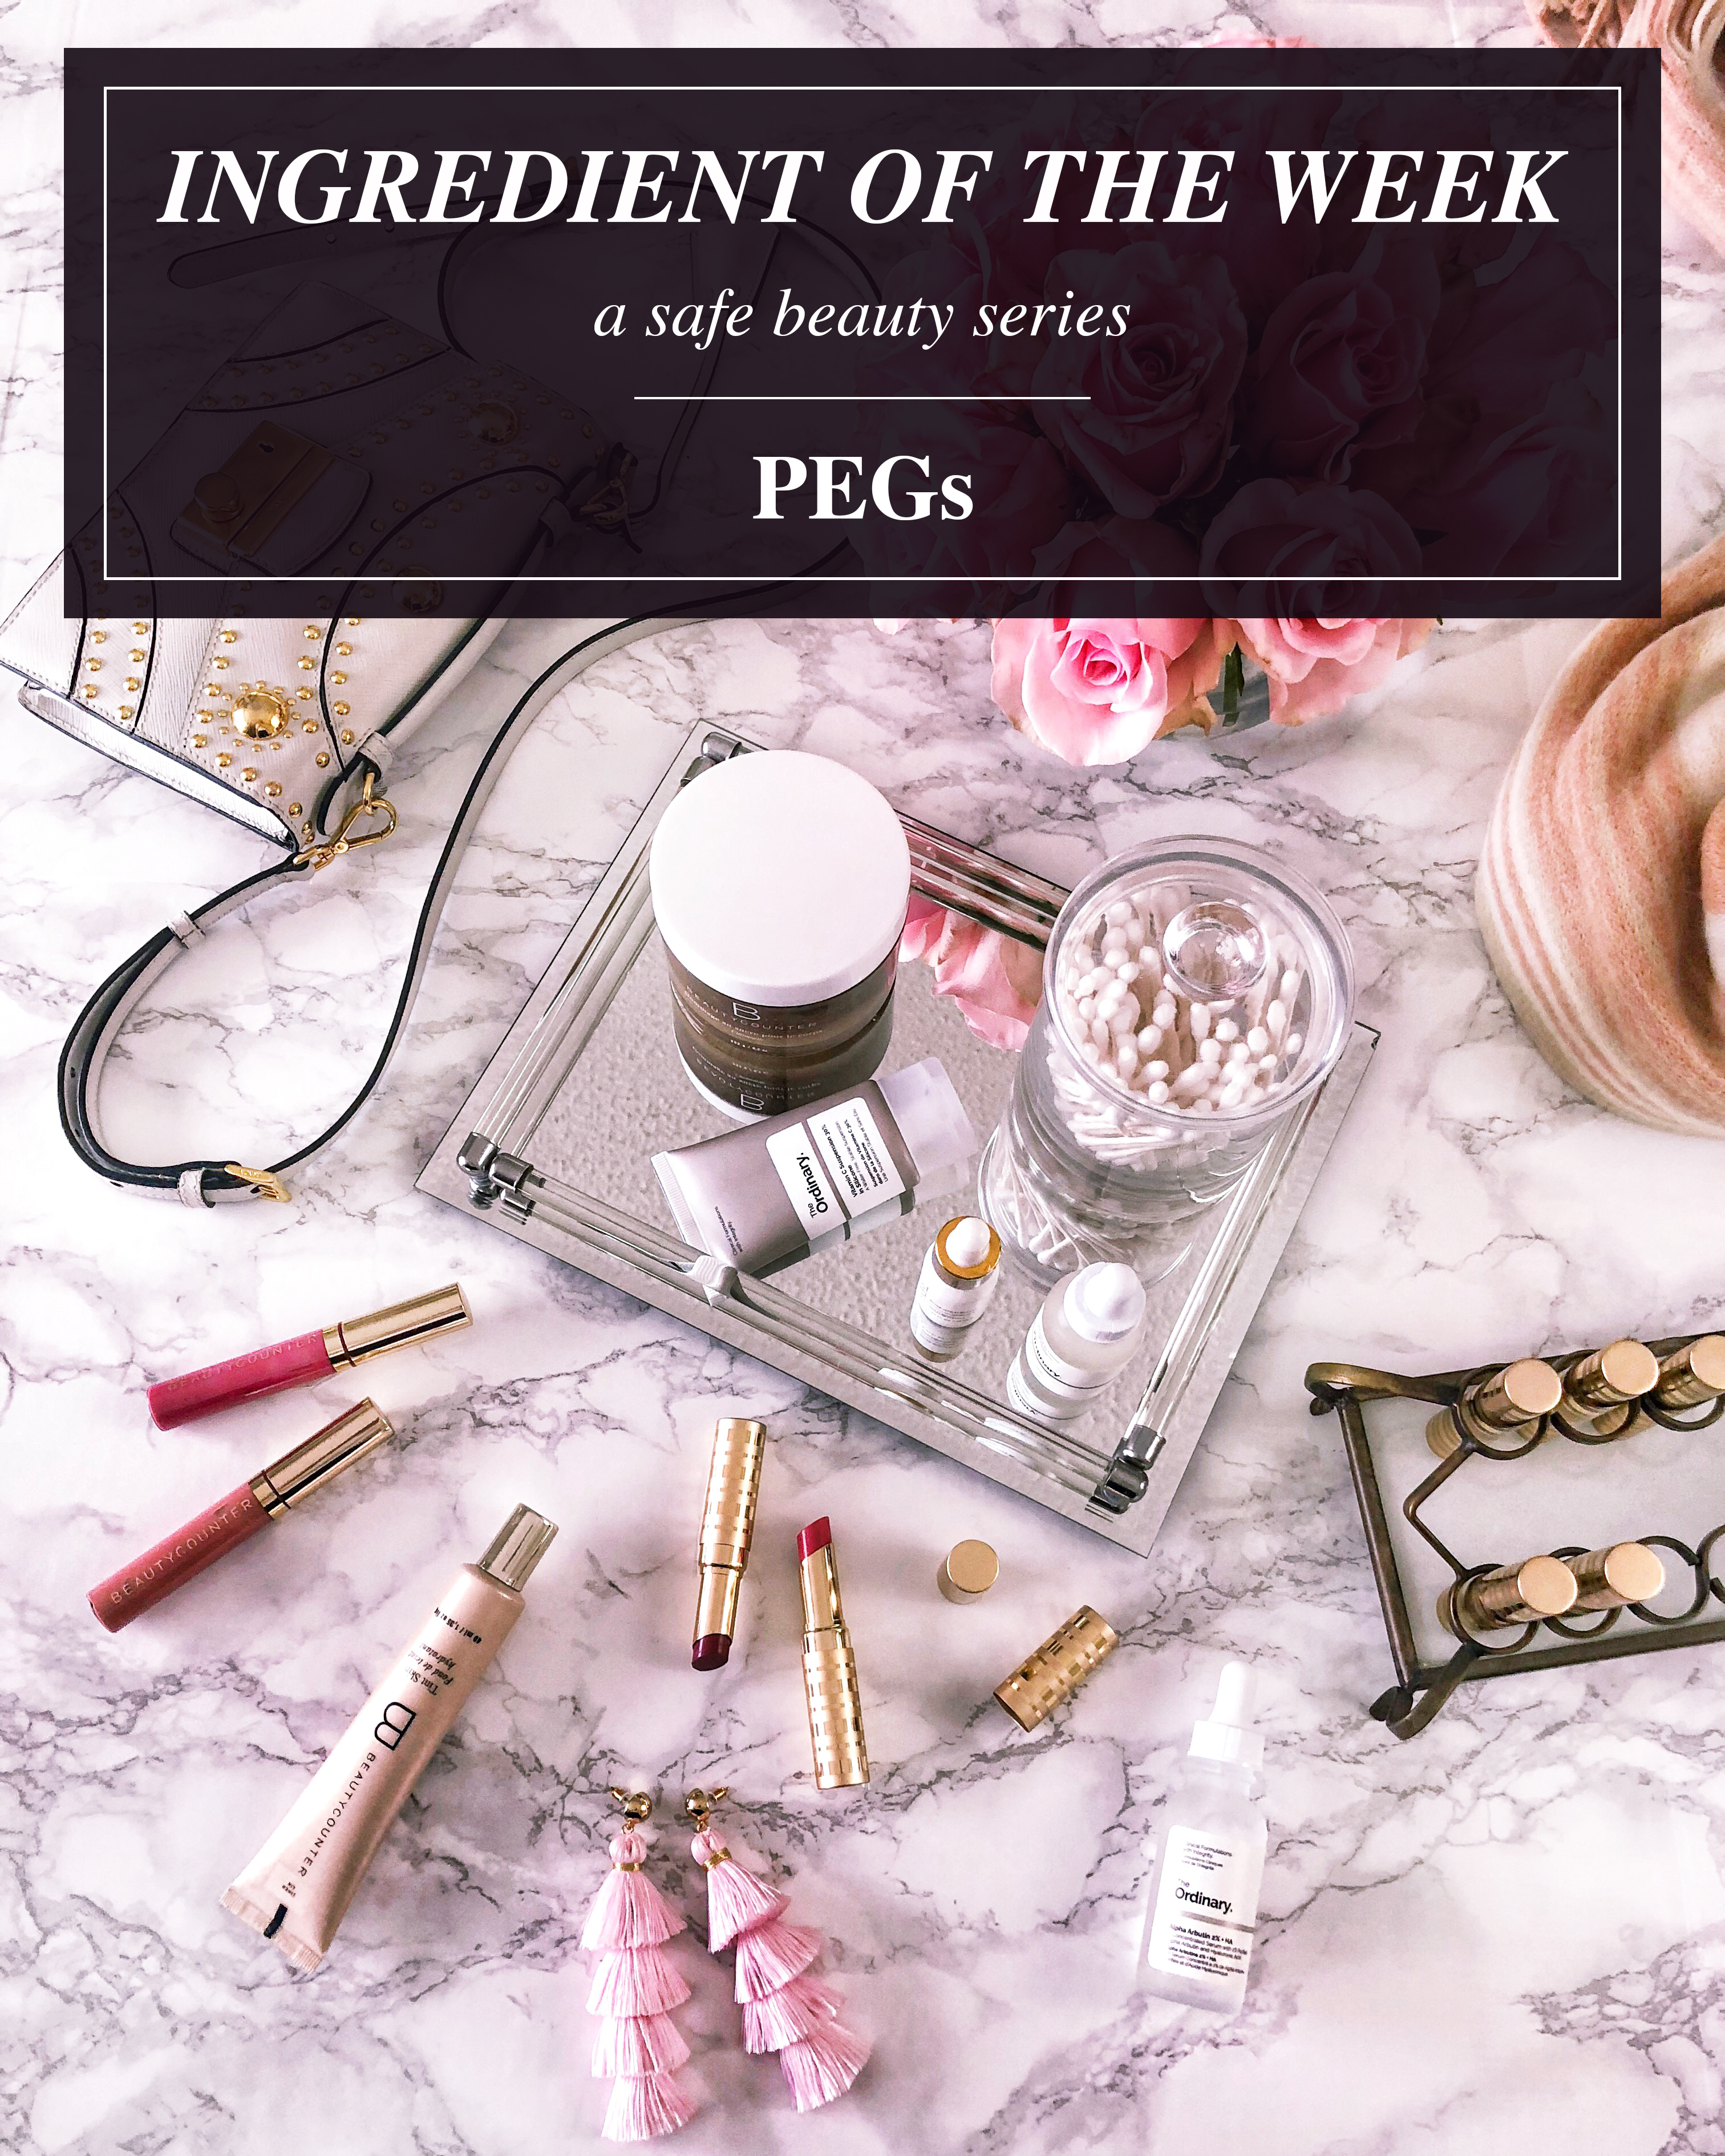 what are PEGs: toxic chemicals on beauty products by popular Chicago beauty blogger Visions of Vogue